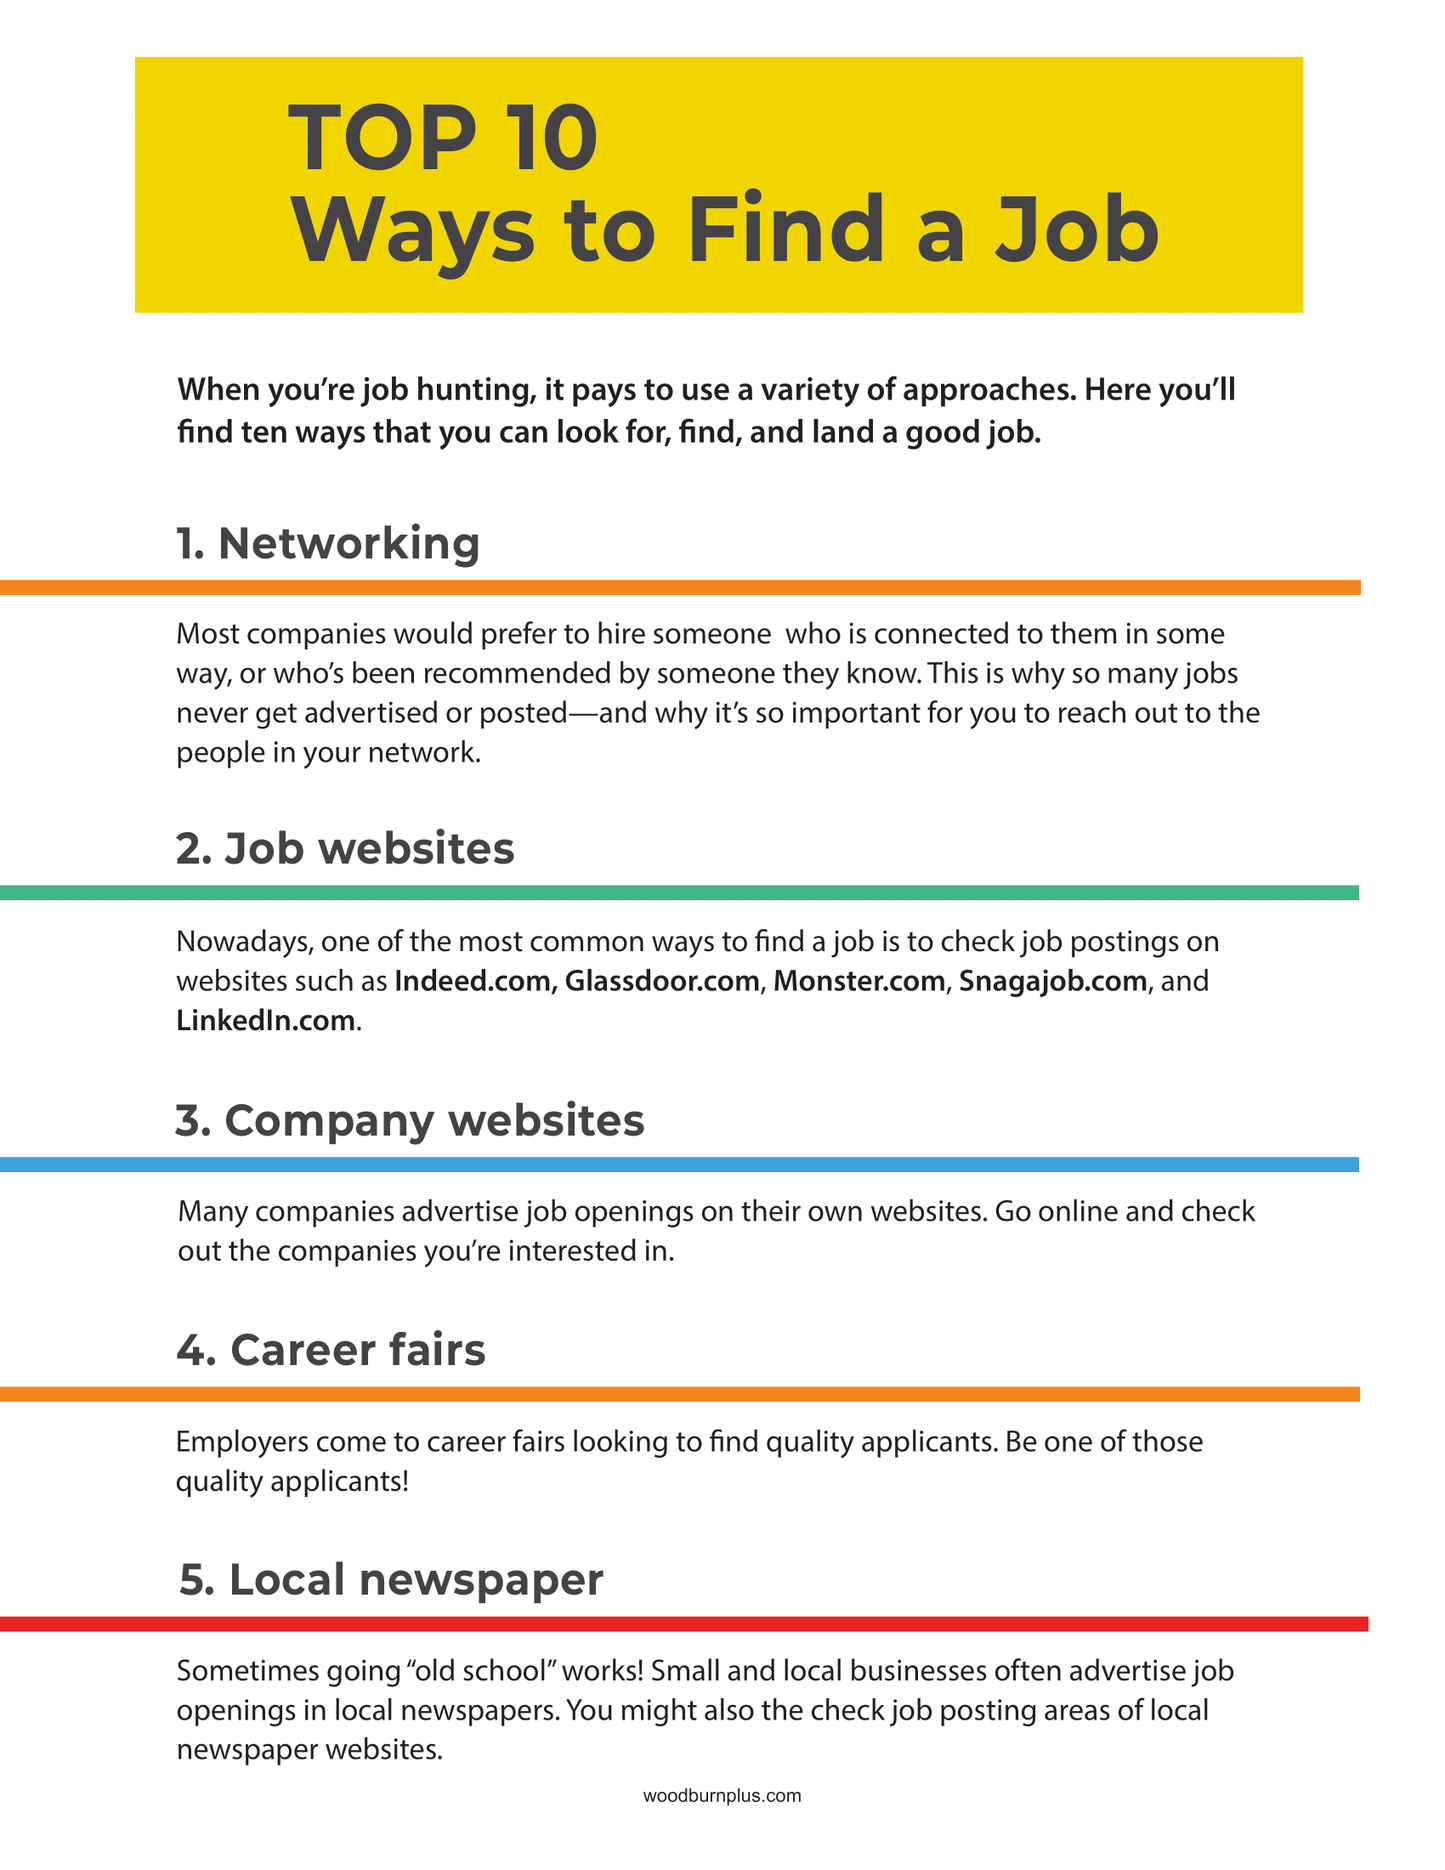 Top 10 Ways to Find a Job